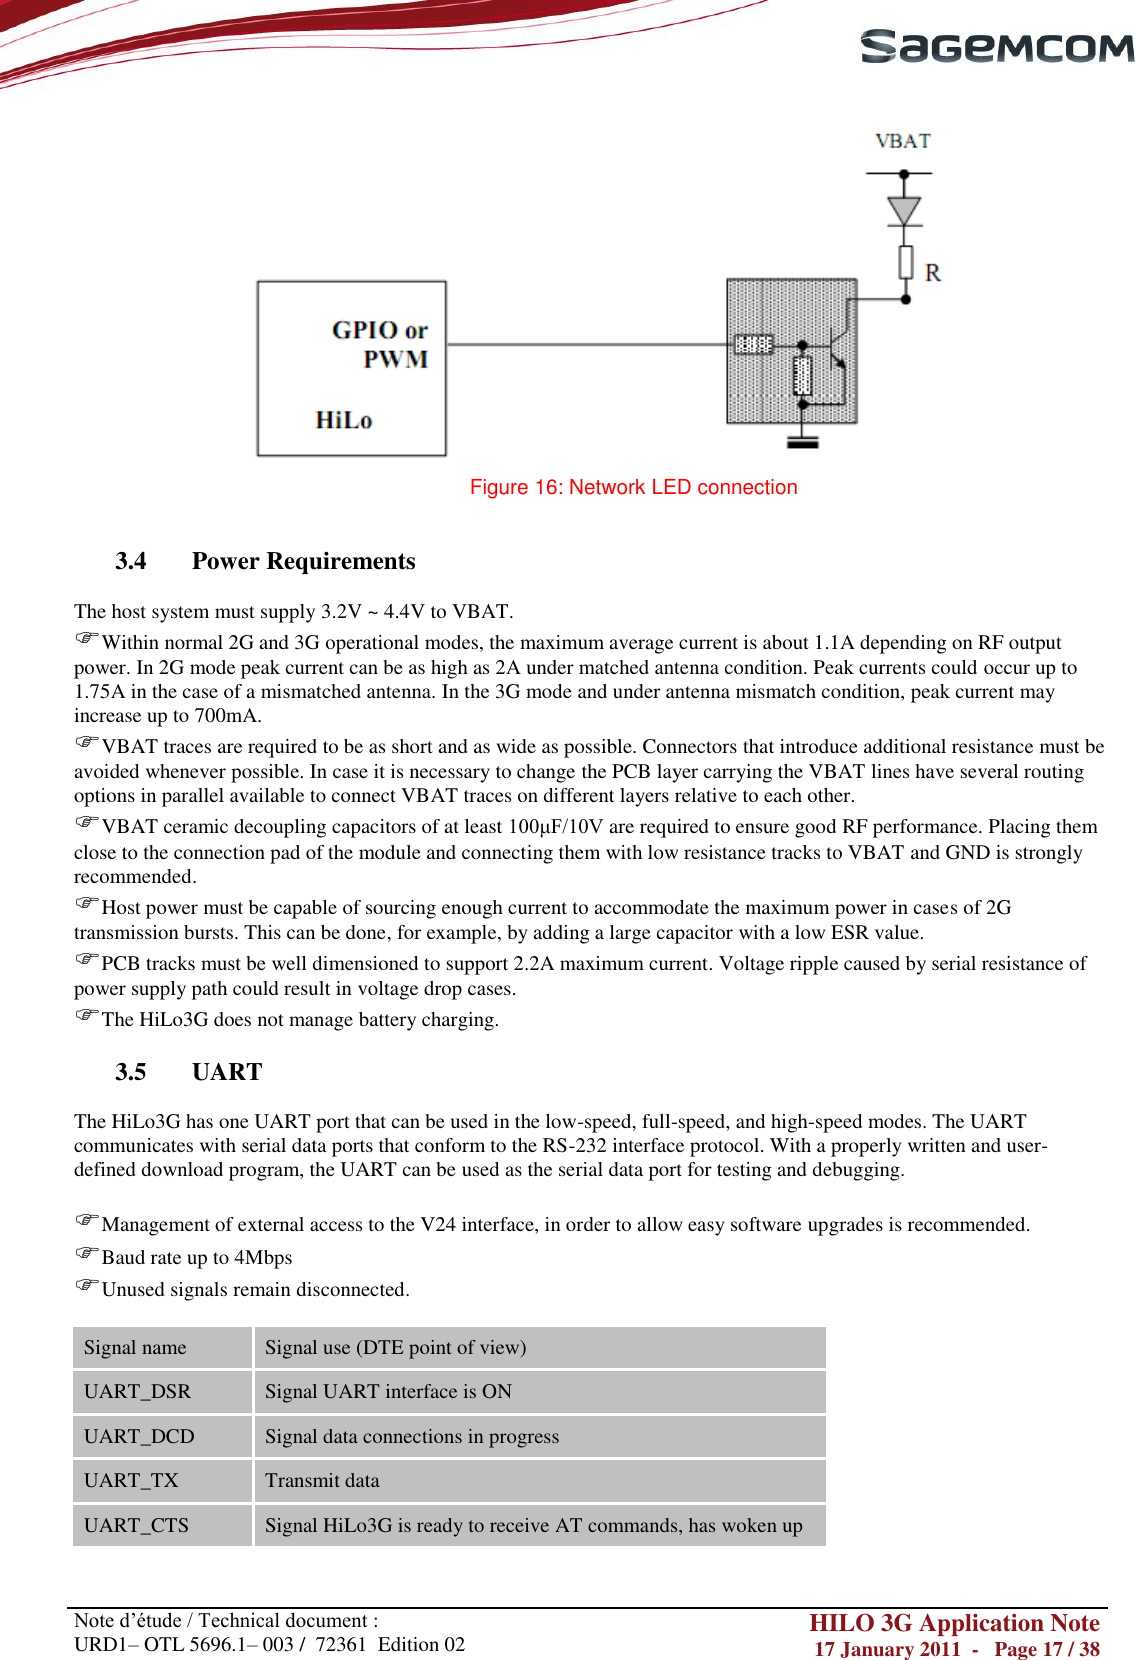       Note d‘étude / Technical document : URD1– OTL 5696.1– 003 /  72361  Edition 02 HILO 3G Application Note 17 January 2011  -   Page 17 / 38     Figure 16: Network LED connection   3.4 Power Requirements  The host system must supply 3.2V ~ 4.4V to VBAT. Within normal 2G and 3G operational modes, the maximum average current is about 1.1A depending on RF output power. In 2G mode peak current can be as high as 2A under matched antenna condition. Peak currents could occur up to 1.75A in the case of a mismatched antenna. In the 3G mode and under antenna mismatch condition, peak current may increase up to 700mA. VBAT traces are required to be as short and as wide as possible. Connectors that introduce additional resistance must be avoided whenever possible. In case it is necessary to change the PCB layer carrying the VBAT lines have several routing options in parallel available to connect VBAT traces on different layers relative to each other. VBAT ceramic decoupling capacitors of at least 100μF/10V are required to ensure good RF performance. Placing them close to the connection pad of the module and connecting them with low resistance tracks to VBAT and GND is strongly recommended.  Host power must be capable of sourcing enough current to accommodate the maximum power in cases of 2G transmission bursts. This can be done, for example, by adding a large capacitor with a low ESR value. PCB tracks must be well dimensioned to support 2.2A maximum current. Voltage ripple caused by serial resistance of power supply path could result in voltage drop cases. The HiLo3G does not manage battery charging.  3.5 UART  The HiLo3G has one UART port that can be used in the low-speed, full-speed, and high-speed modes. The UART communicates with serial data ports that conform to the RS-232 interface protocol. With a properly written and user-defined download program, the UART can be used as the serial data port for testing and debugging.   Management of external access to the V24 interface, in order to allow easy software upgrades is recommended. Baud rate up to 4Mbps Unused signals remain disconnected.  Signal name Signal use (DTE point of view) UART_DSR Signal UART interface is ON UART_DCD Signal data connections in progress UART_TX Transmit data UART_CTS Signal HiLo3G is ready to receive AT commands, has woken up 